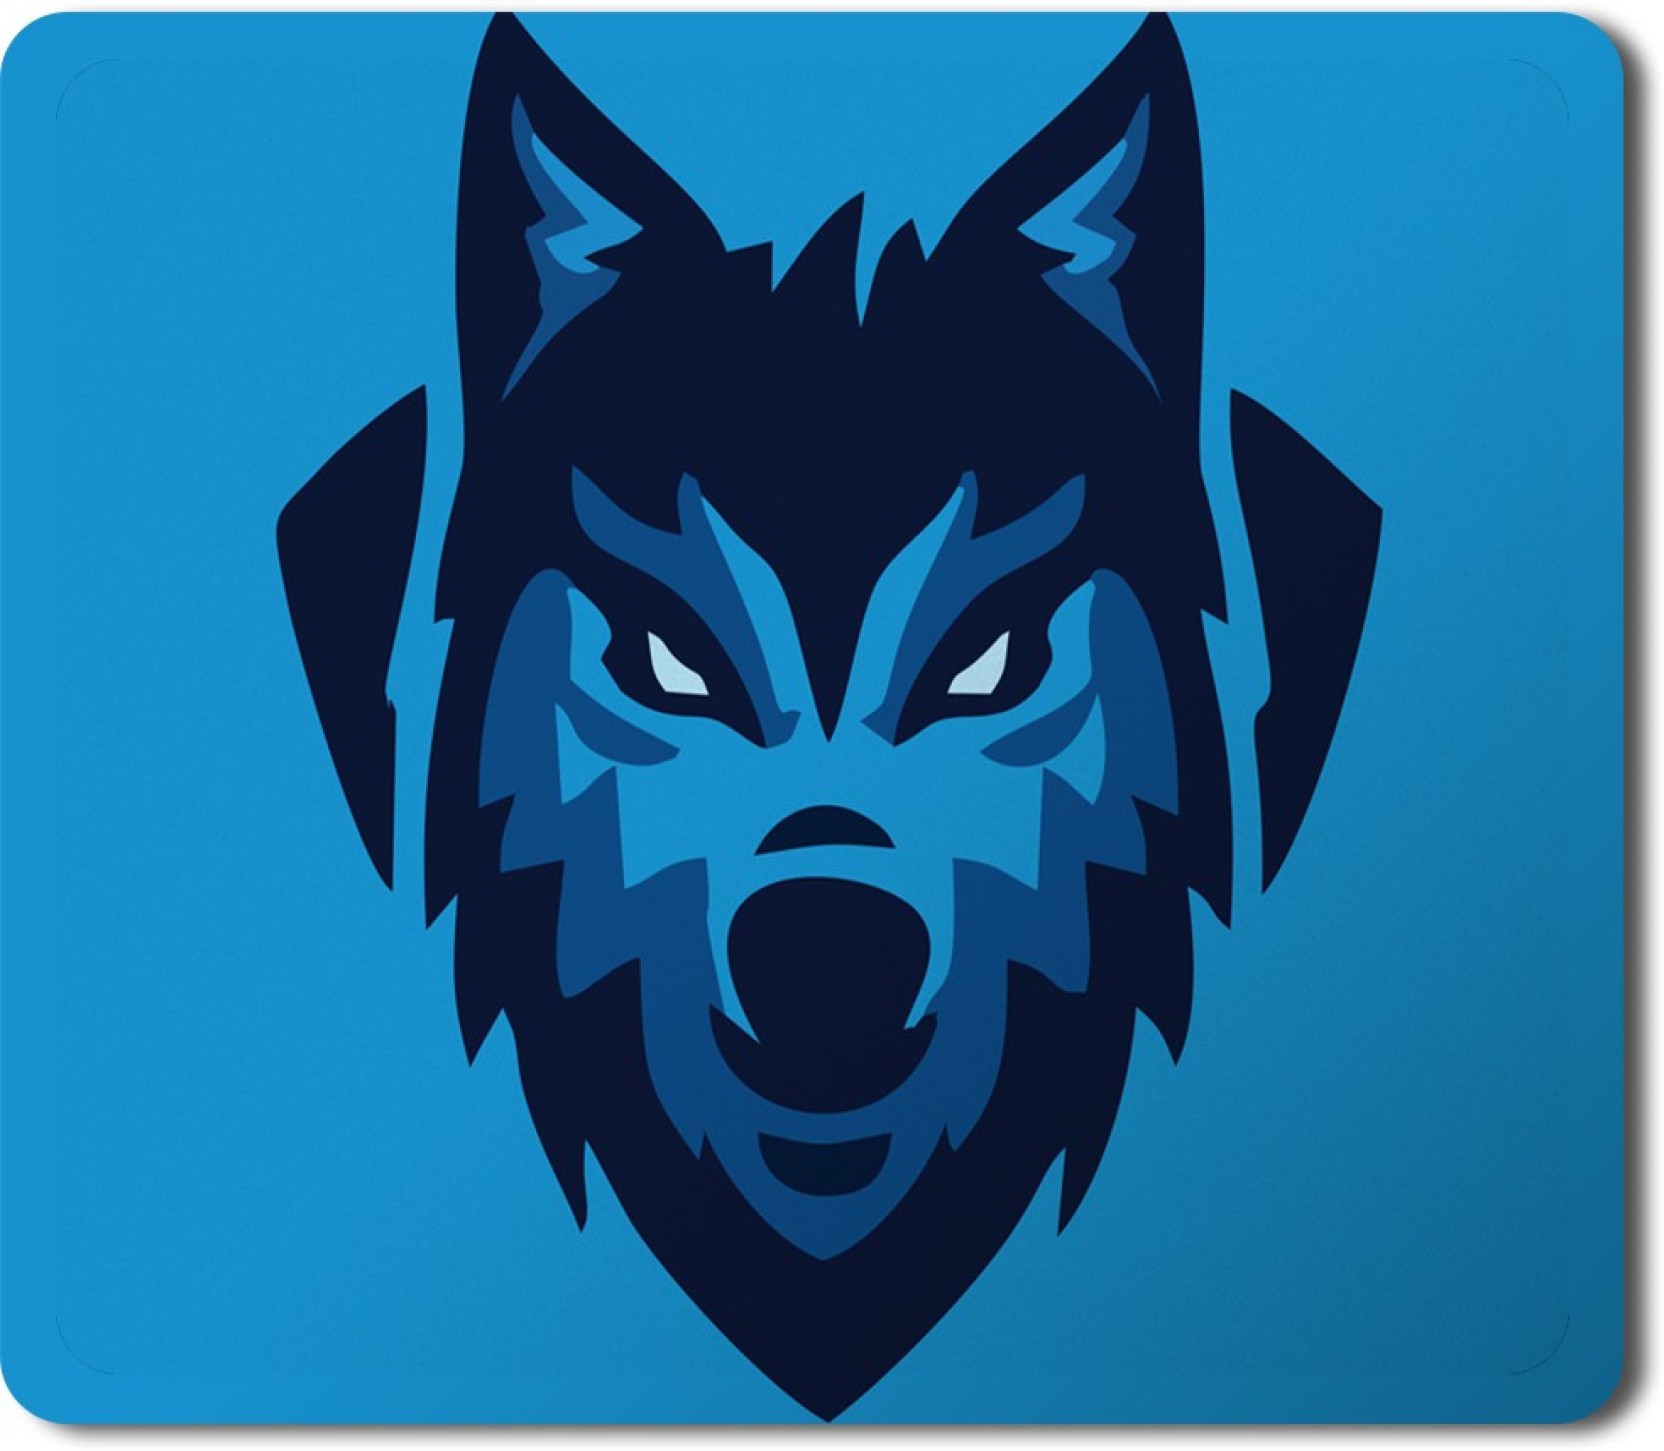 Motivatebox India Wolf Logo Design Cool And Quirky Mousepad For